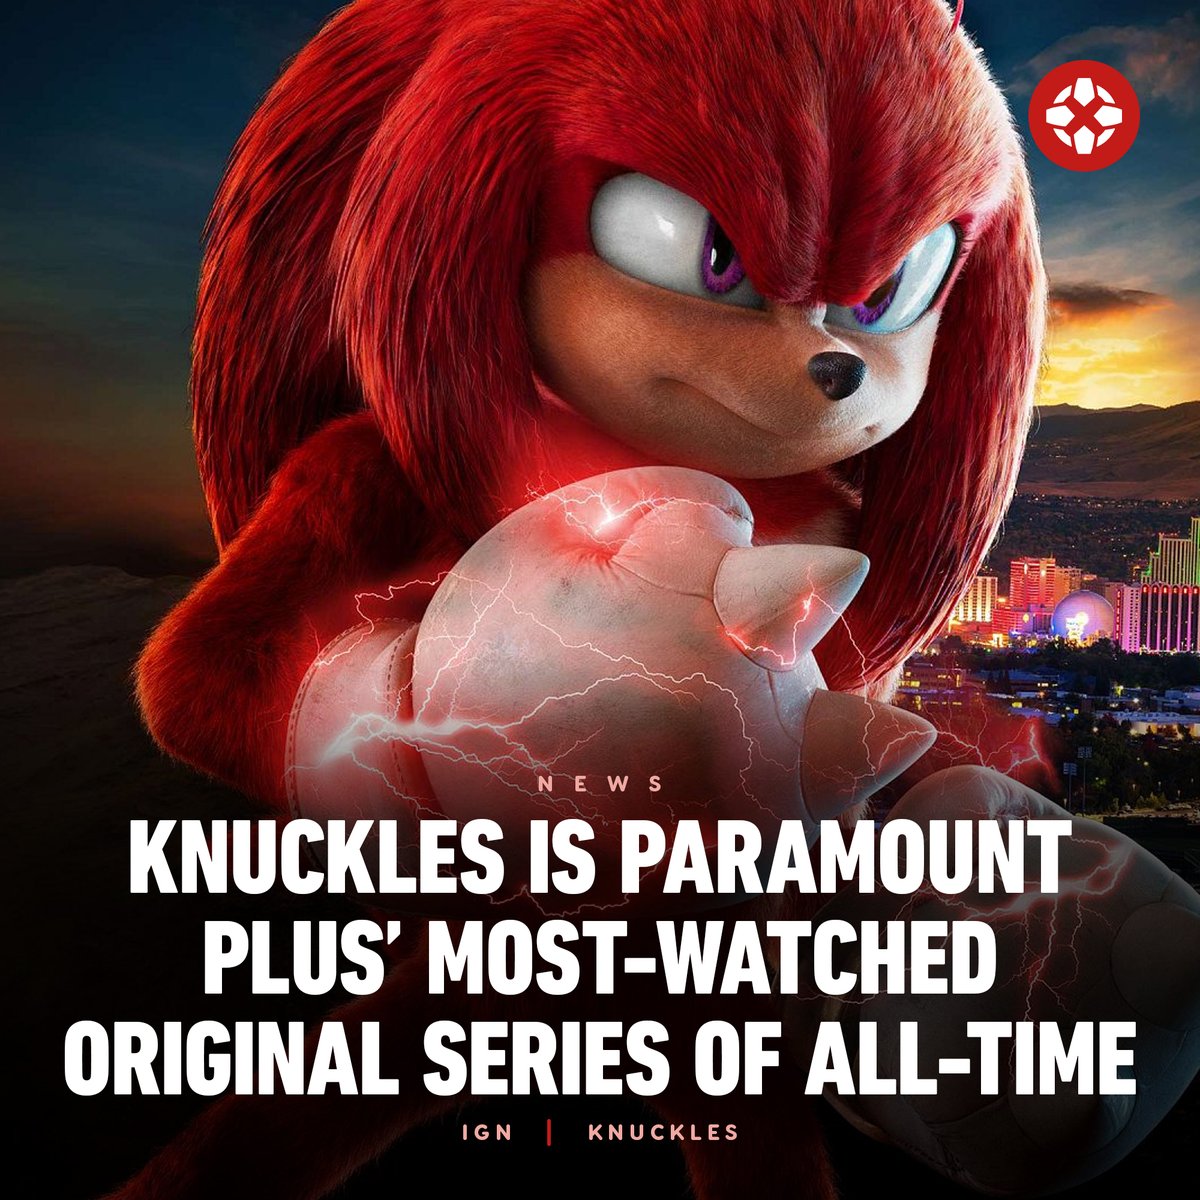 The Knuckles series on Paramount+ has set multiple records for the streaming service, including the most-watched original series of all time with more than 4M hours streamed over premiere weekend.